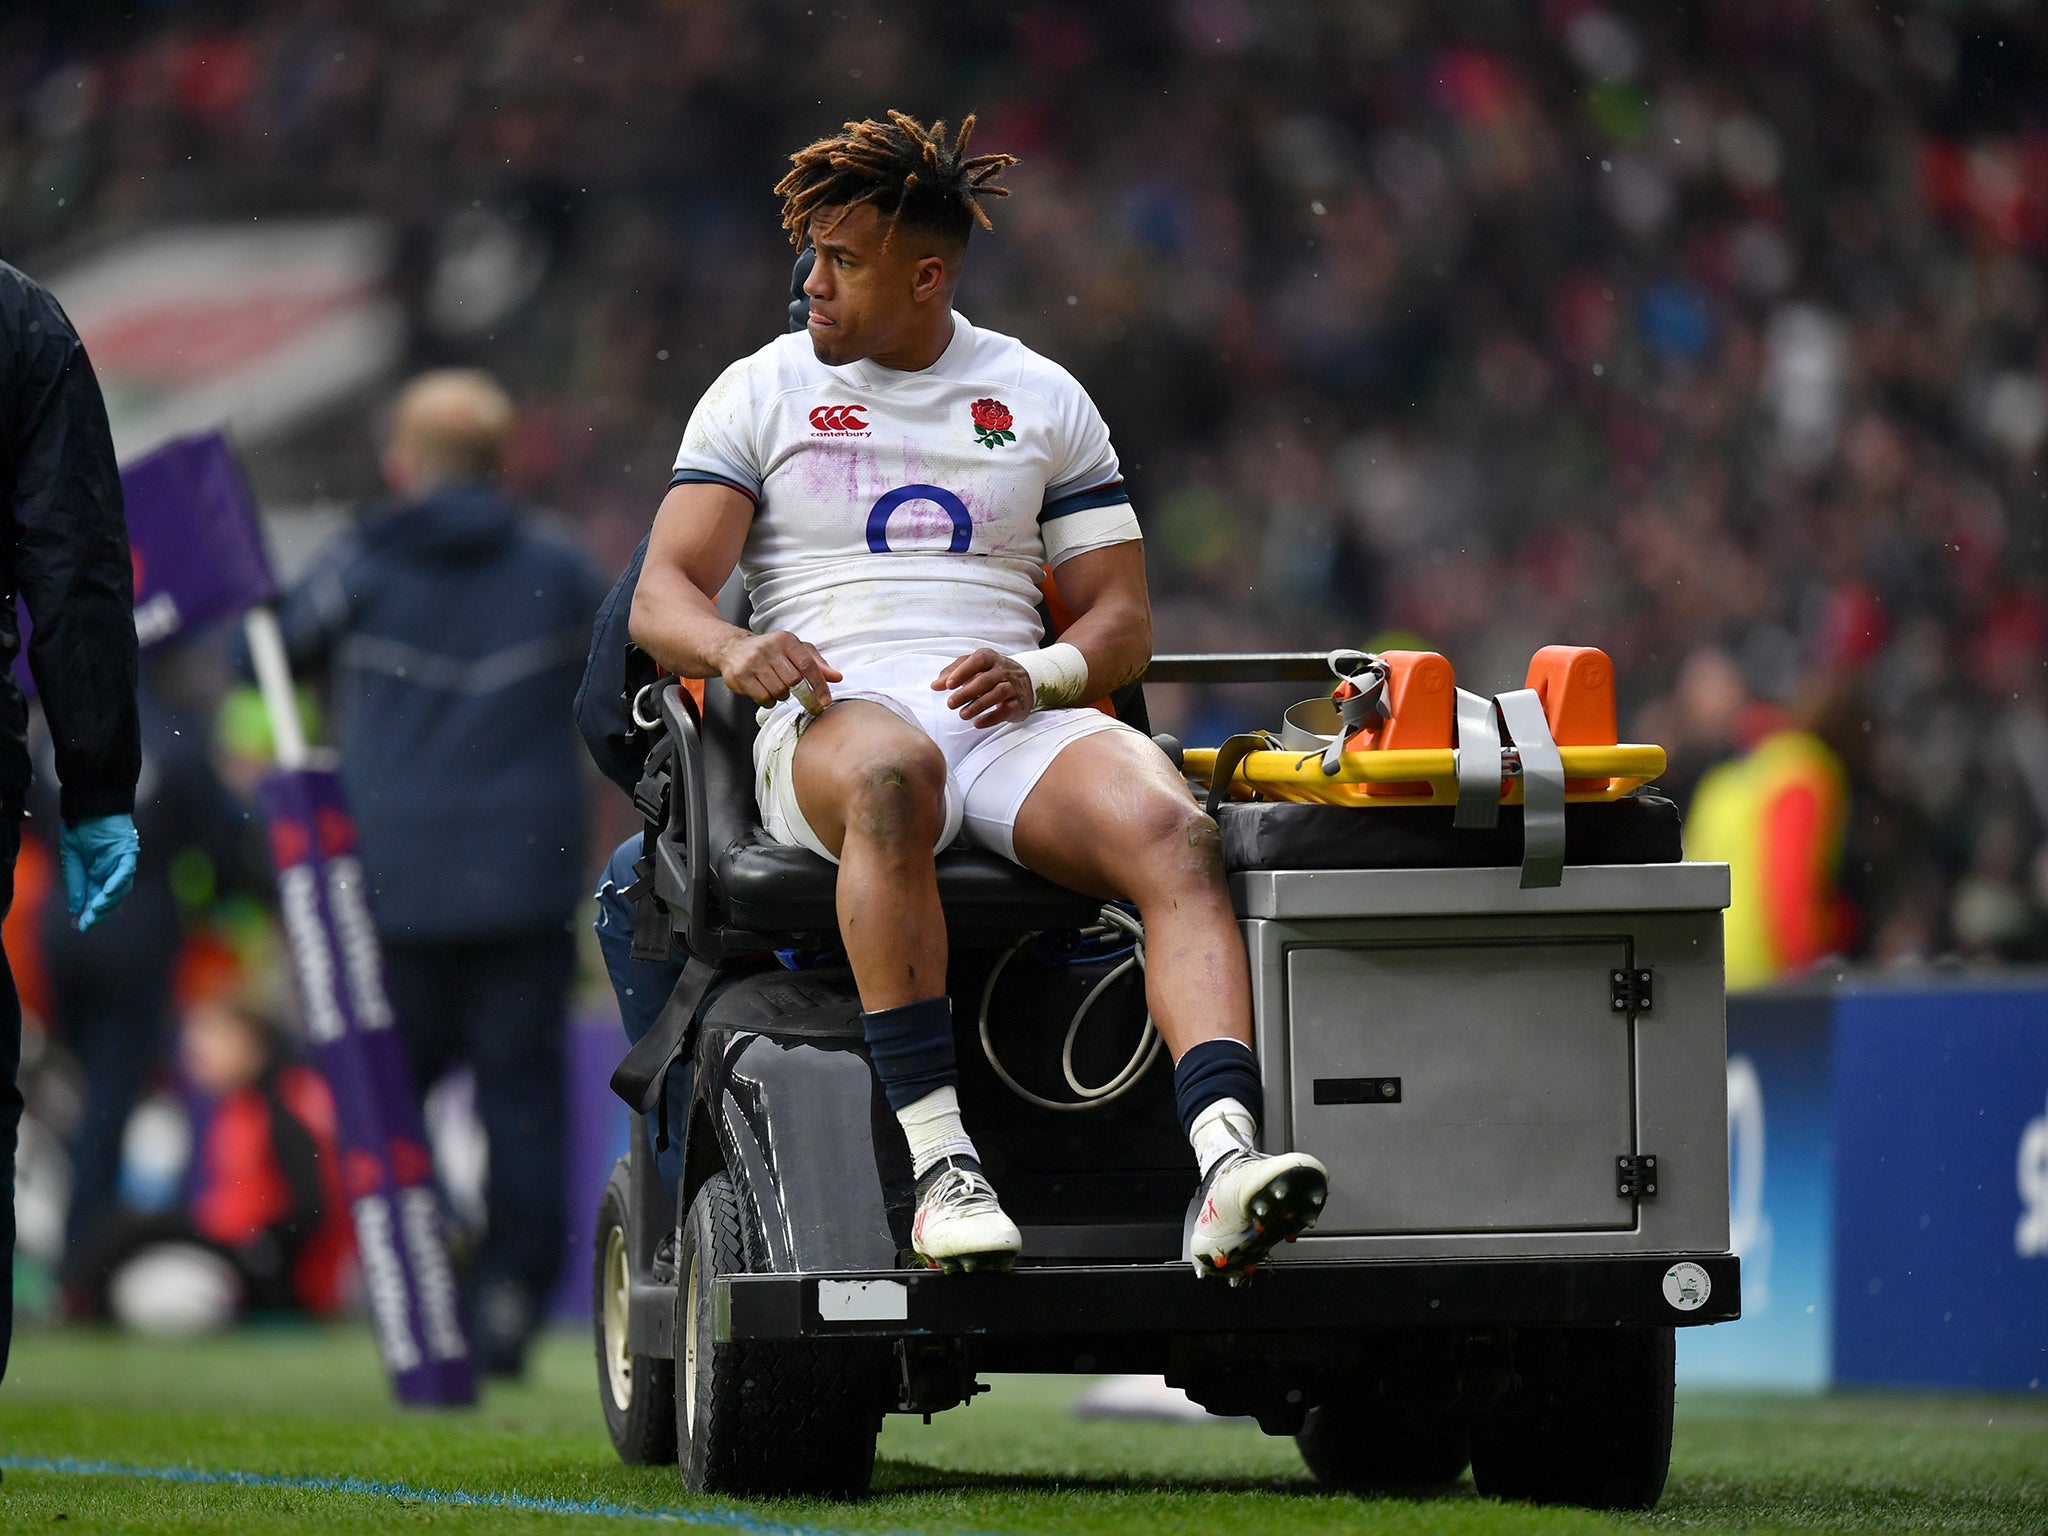 Watson has not played since rupturing his Achilles in March 2018